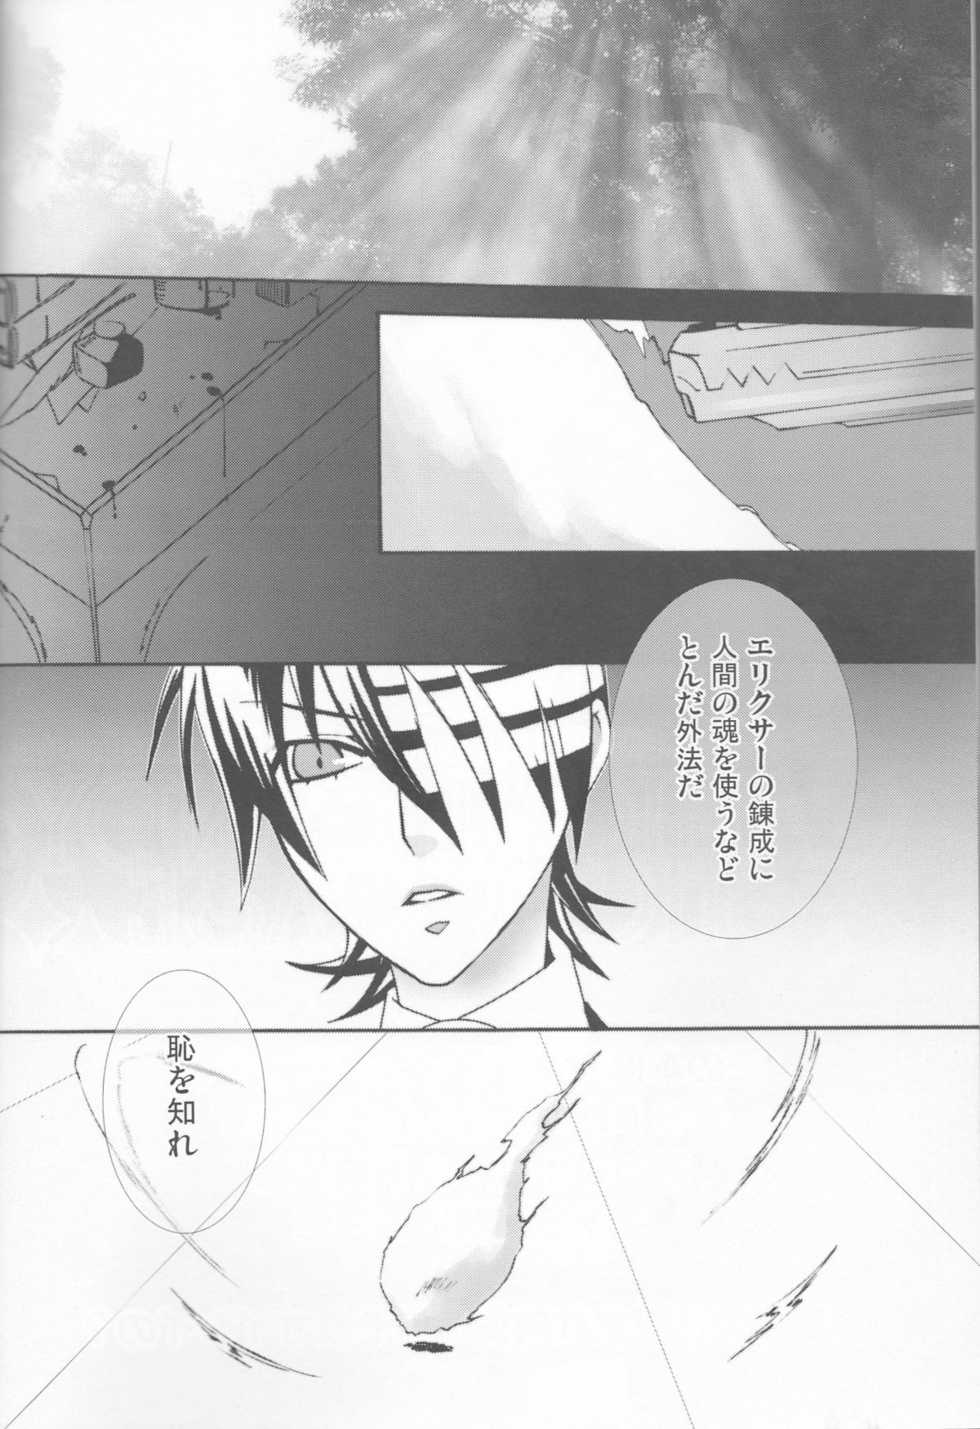 [90℃ (Suwo)] Camical Candy Show Case (Soul Eater) - Page 3